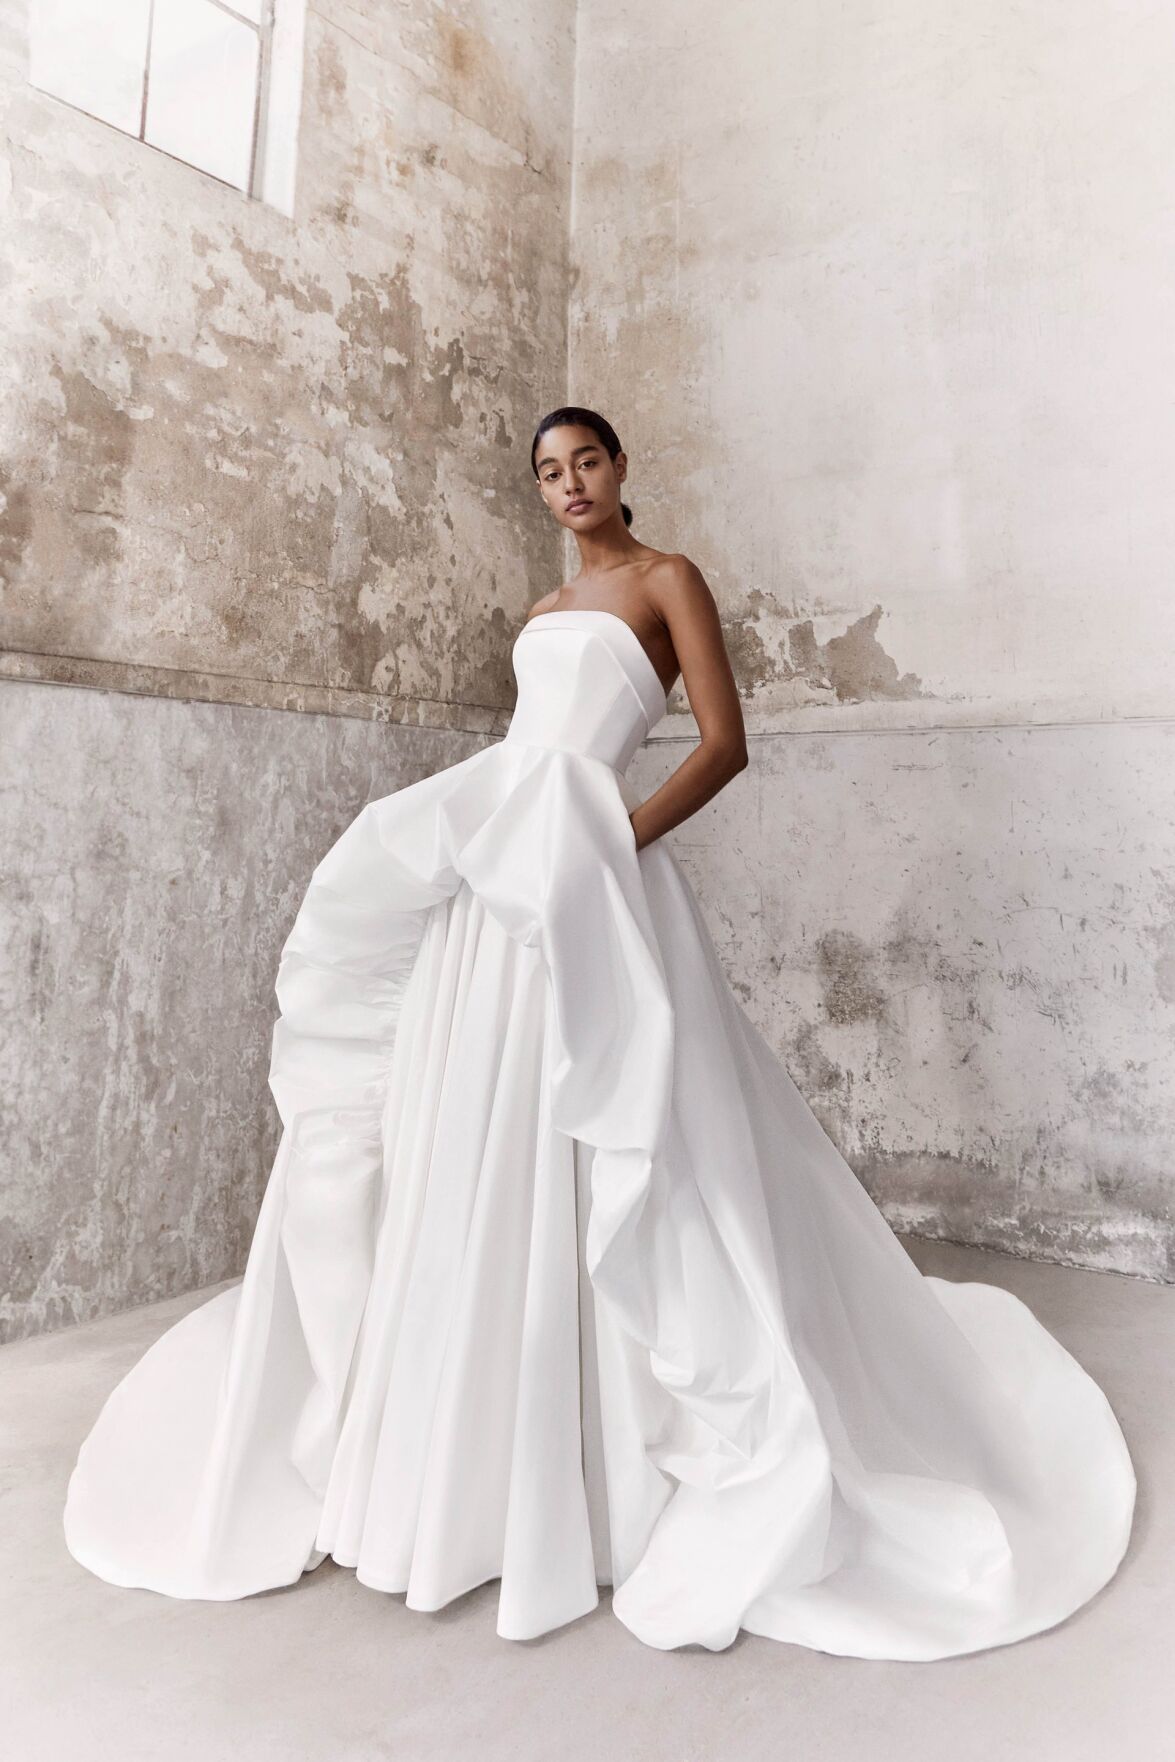 The 2021 Bridal Trends To Jump On Now